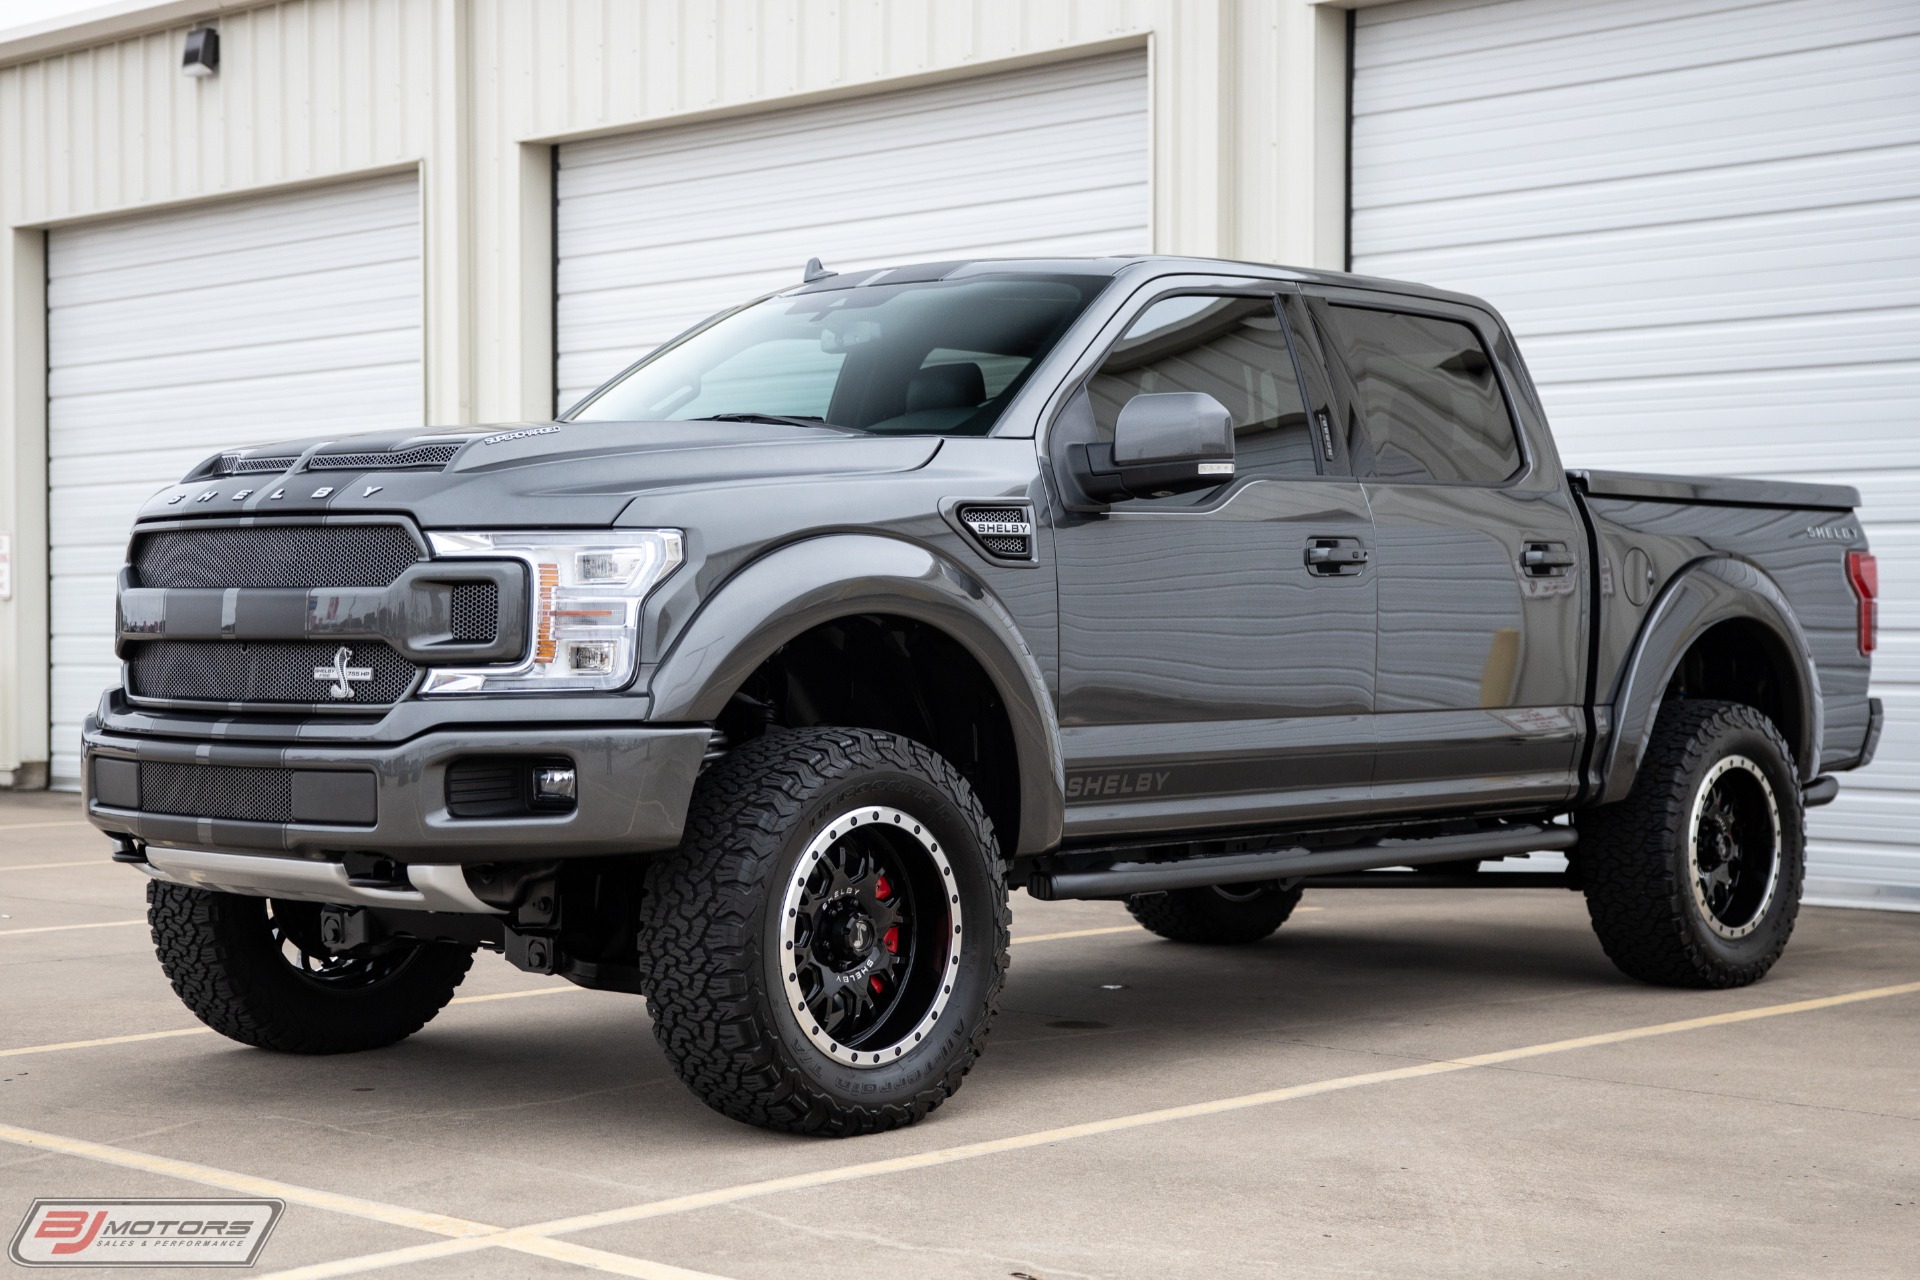 Used-2018-Ford-F-150-Shelby-755HP-Supercharged